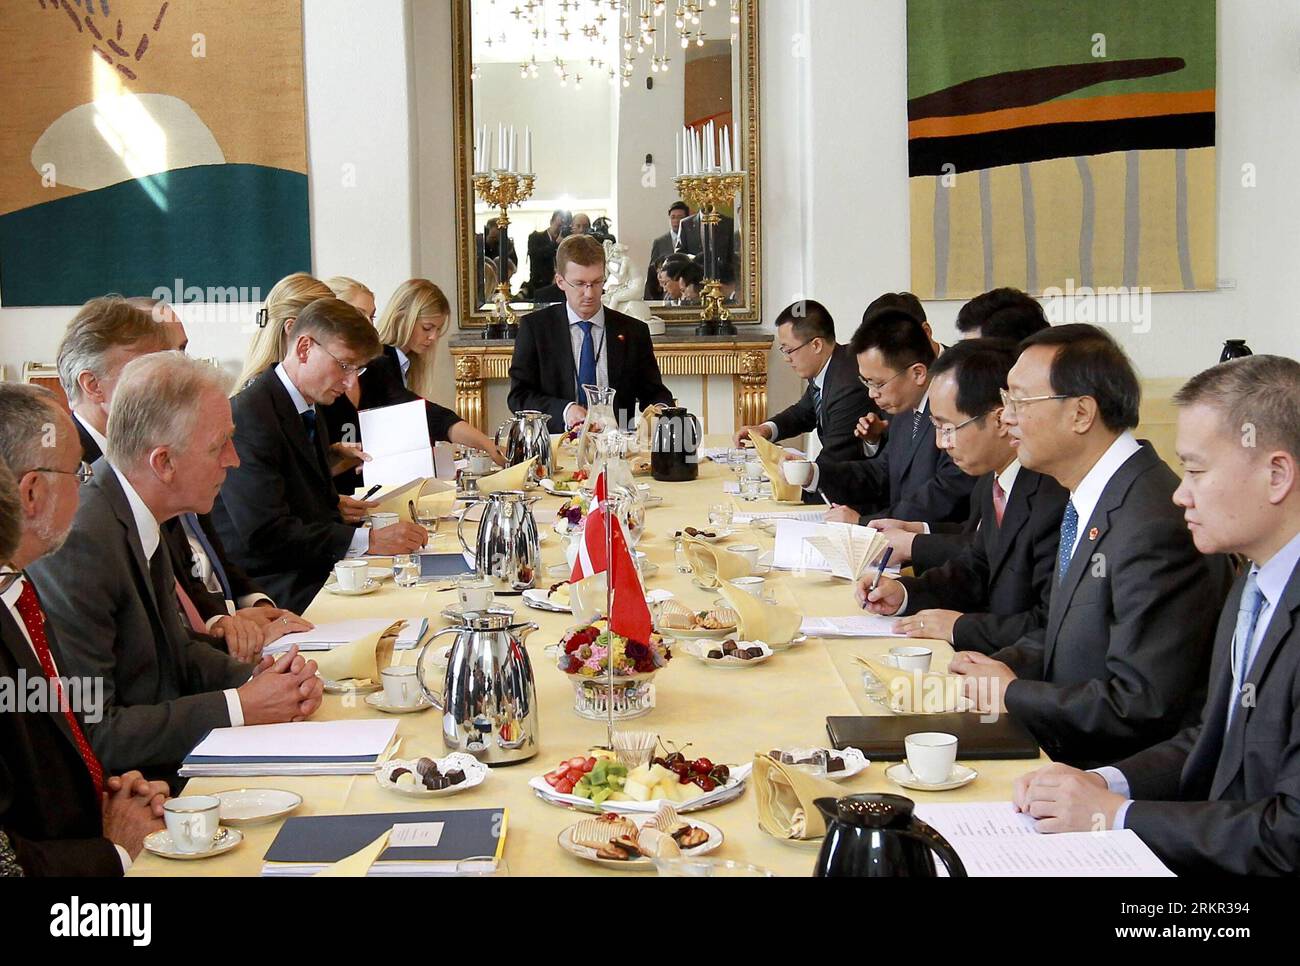 Bildnummer: 58111438  Datum: 15.06.2012  Copyright: imago/Xinhua (120615) -- COPENHAGEN, June 15, 2012 (Xinhua) -- Chinese Foreign Minister Yang Jiechi (2nd R) meets with his Danish counterpart Villy Sovndal in Copenhagen, June 15, 2012. The two sides discussed bilateral relations on Friday, pledging to further cooperation. (Xinhua/Ding Lin) DENMARK-CHINA-FM-MEETING PUBLICATIONxNOTxINxCHN People Politik xjh x0x premiumd 2012 quer      58111438 Date 15 06 2012 Copyright Imago XINHUA  Copenhagen June 15 2012 XINHUA Chinese Foreign Ministers Yang Jiechi 2nd r Meets With His Danish Part Villy Sovn Stock Photo